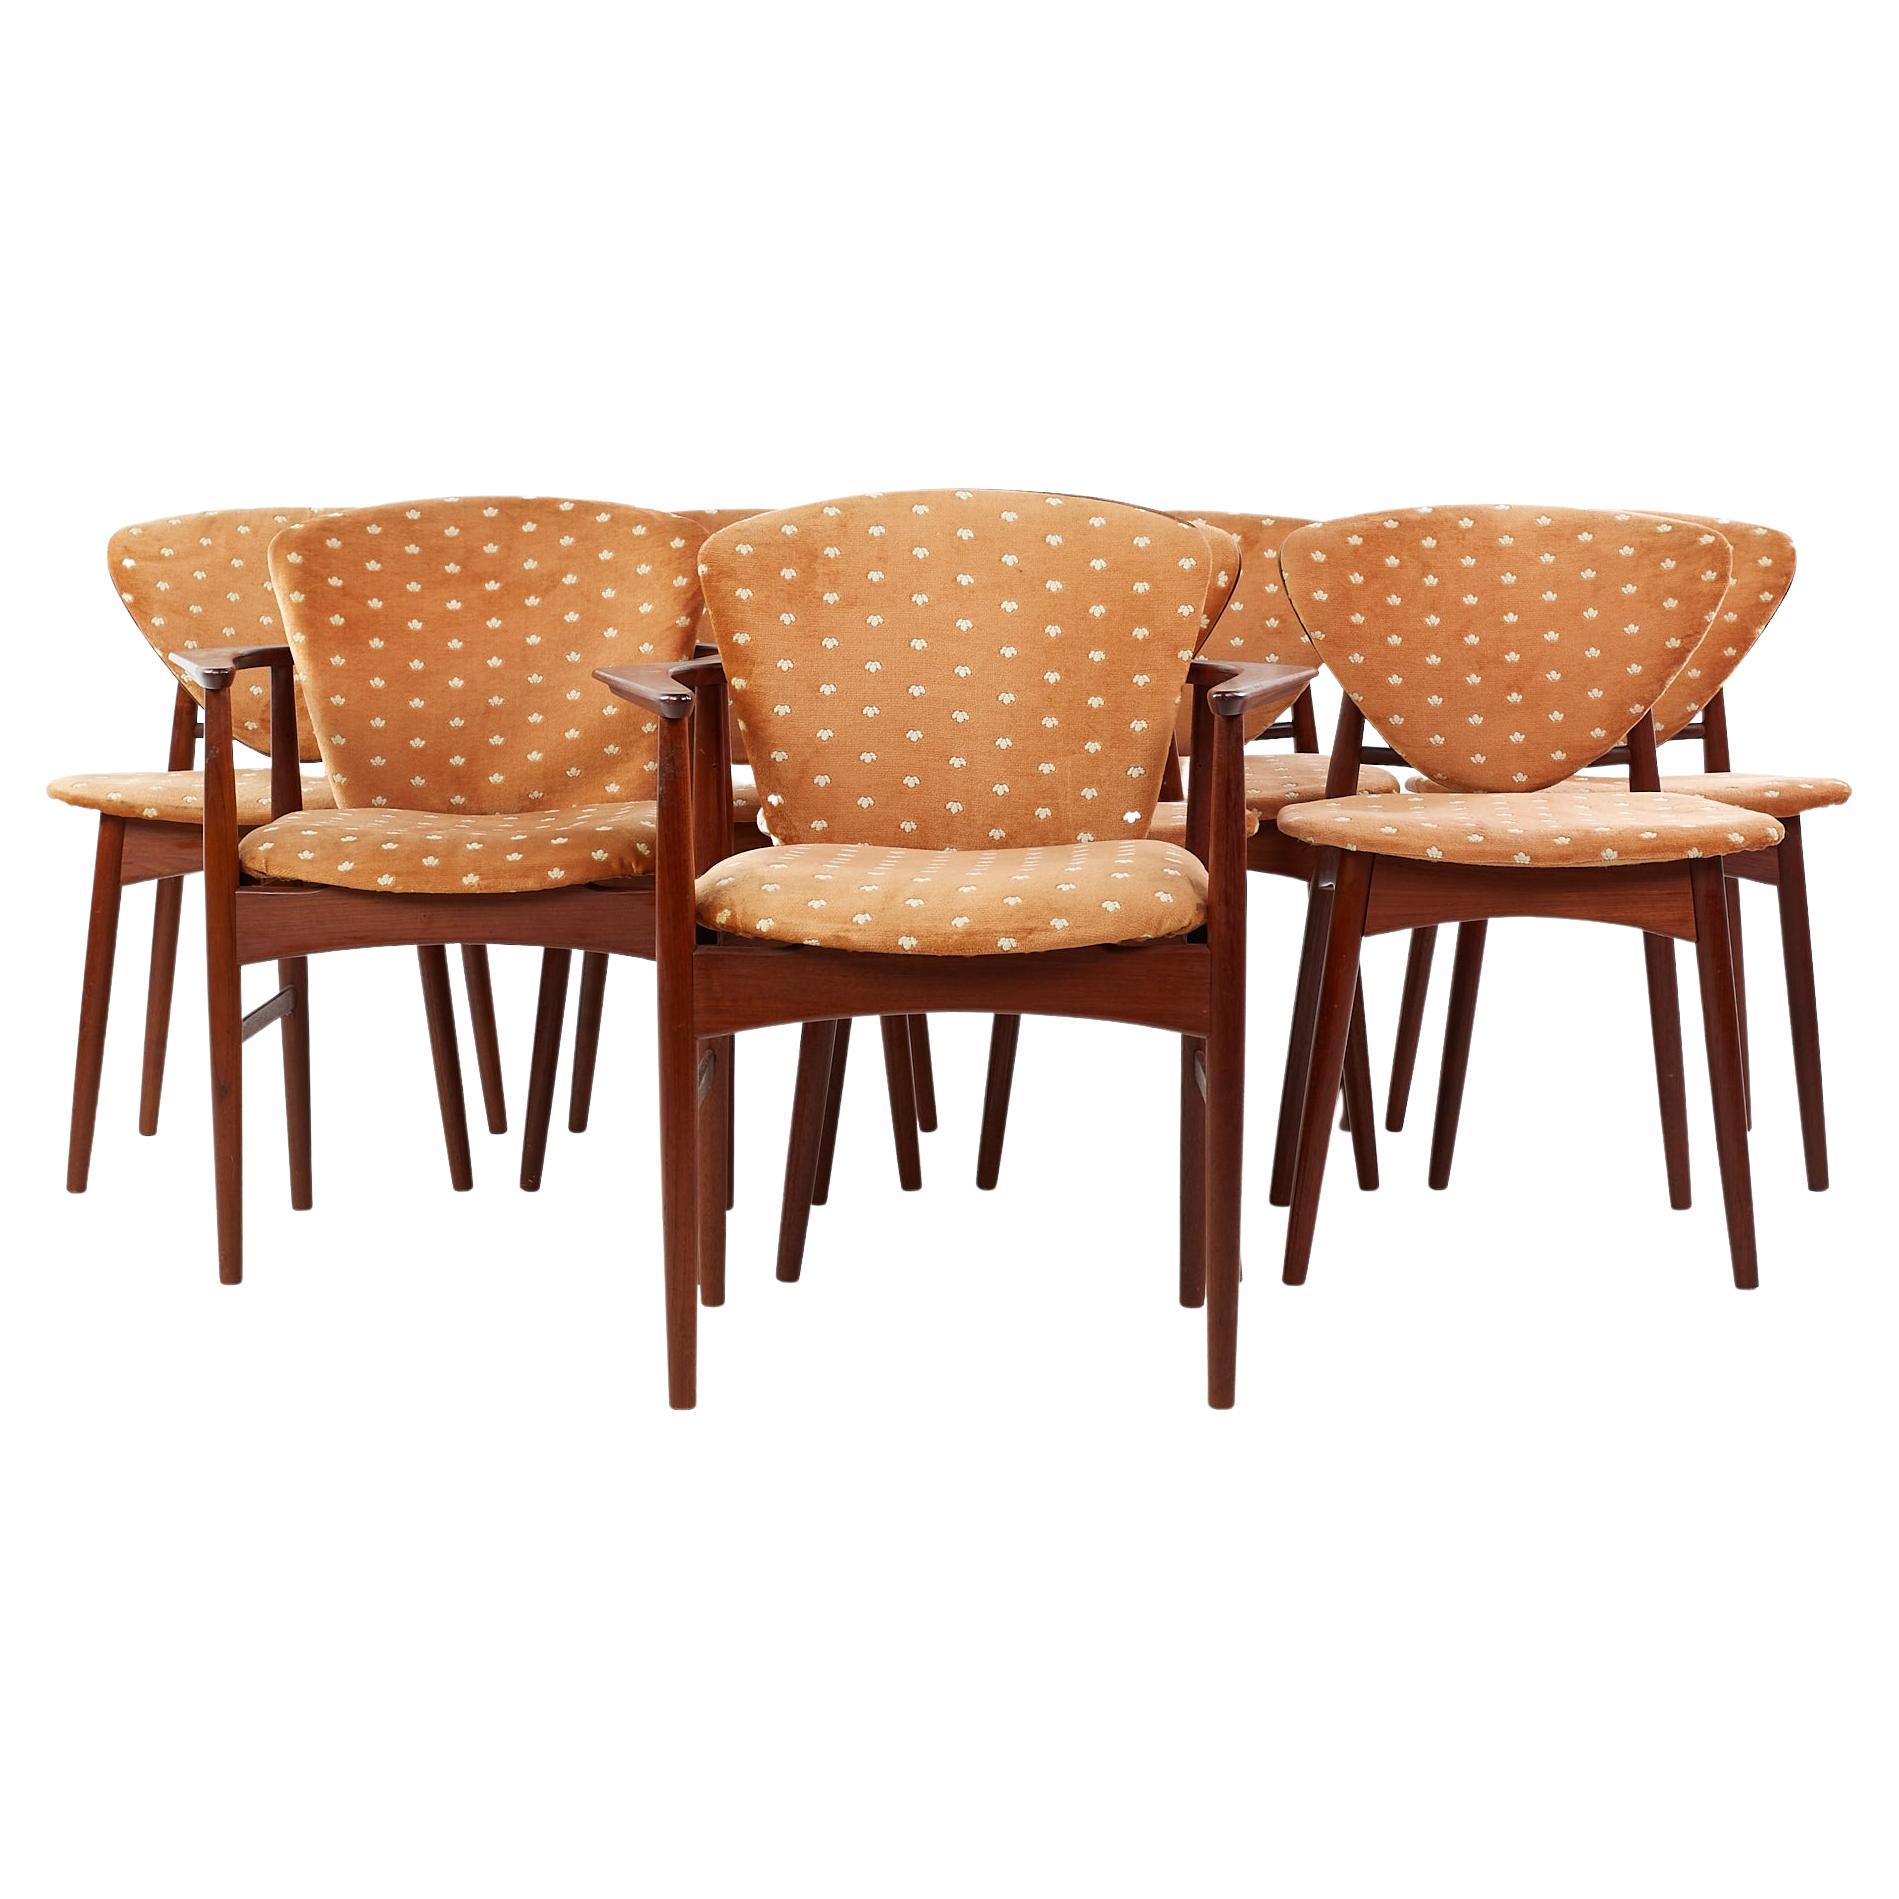 Arne Hovmand Olsen for Onsild Mobelfabrik mid century teak dining chairs - set of 8.

Each armless chair measures: 20 wide x 23 deep x 31 high, with a seat height of 18 inches.
Each captains chair measures: 27 wide x 23 deep x 32 high, with a